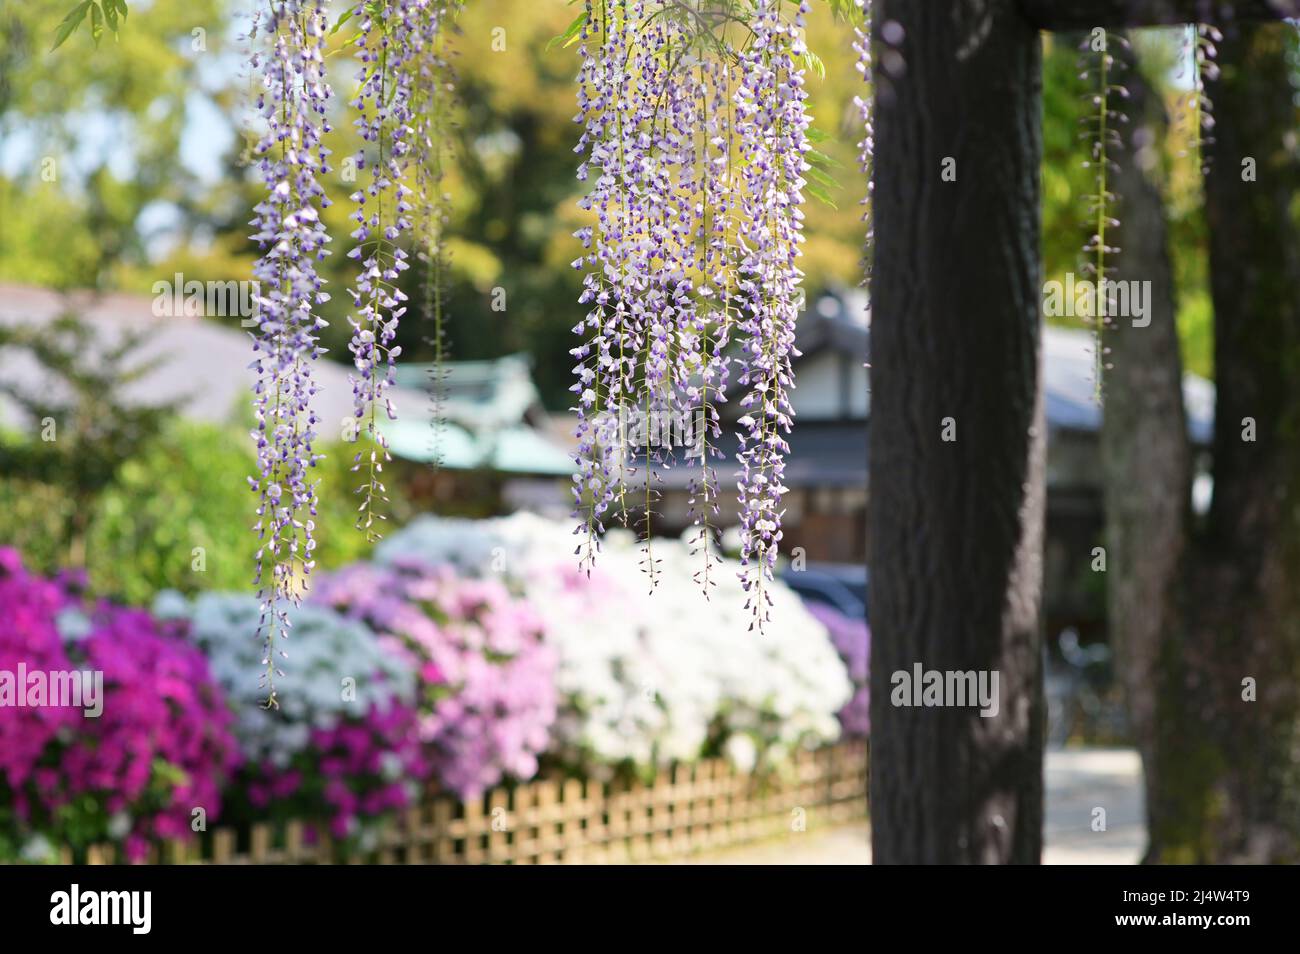 Wisteria flowers hanging down from a support structure. Flowers in the background. Springtime in a Japanese garden. Stock Photo